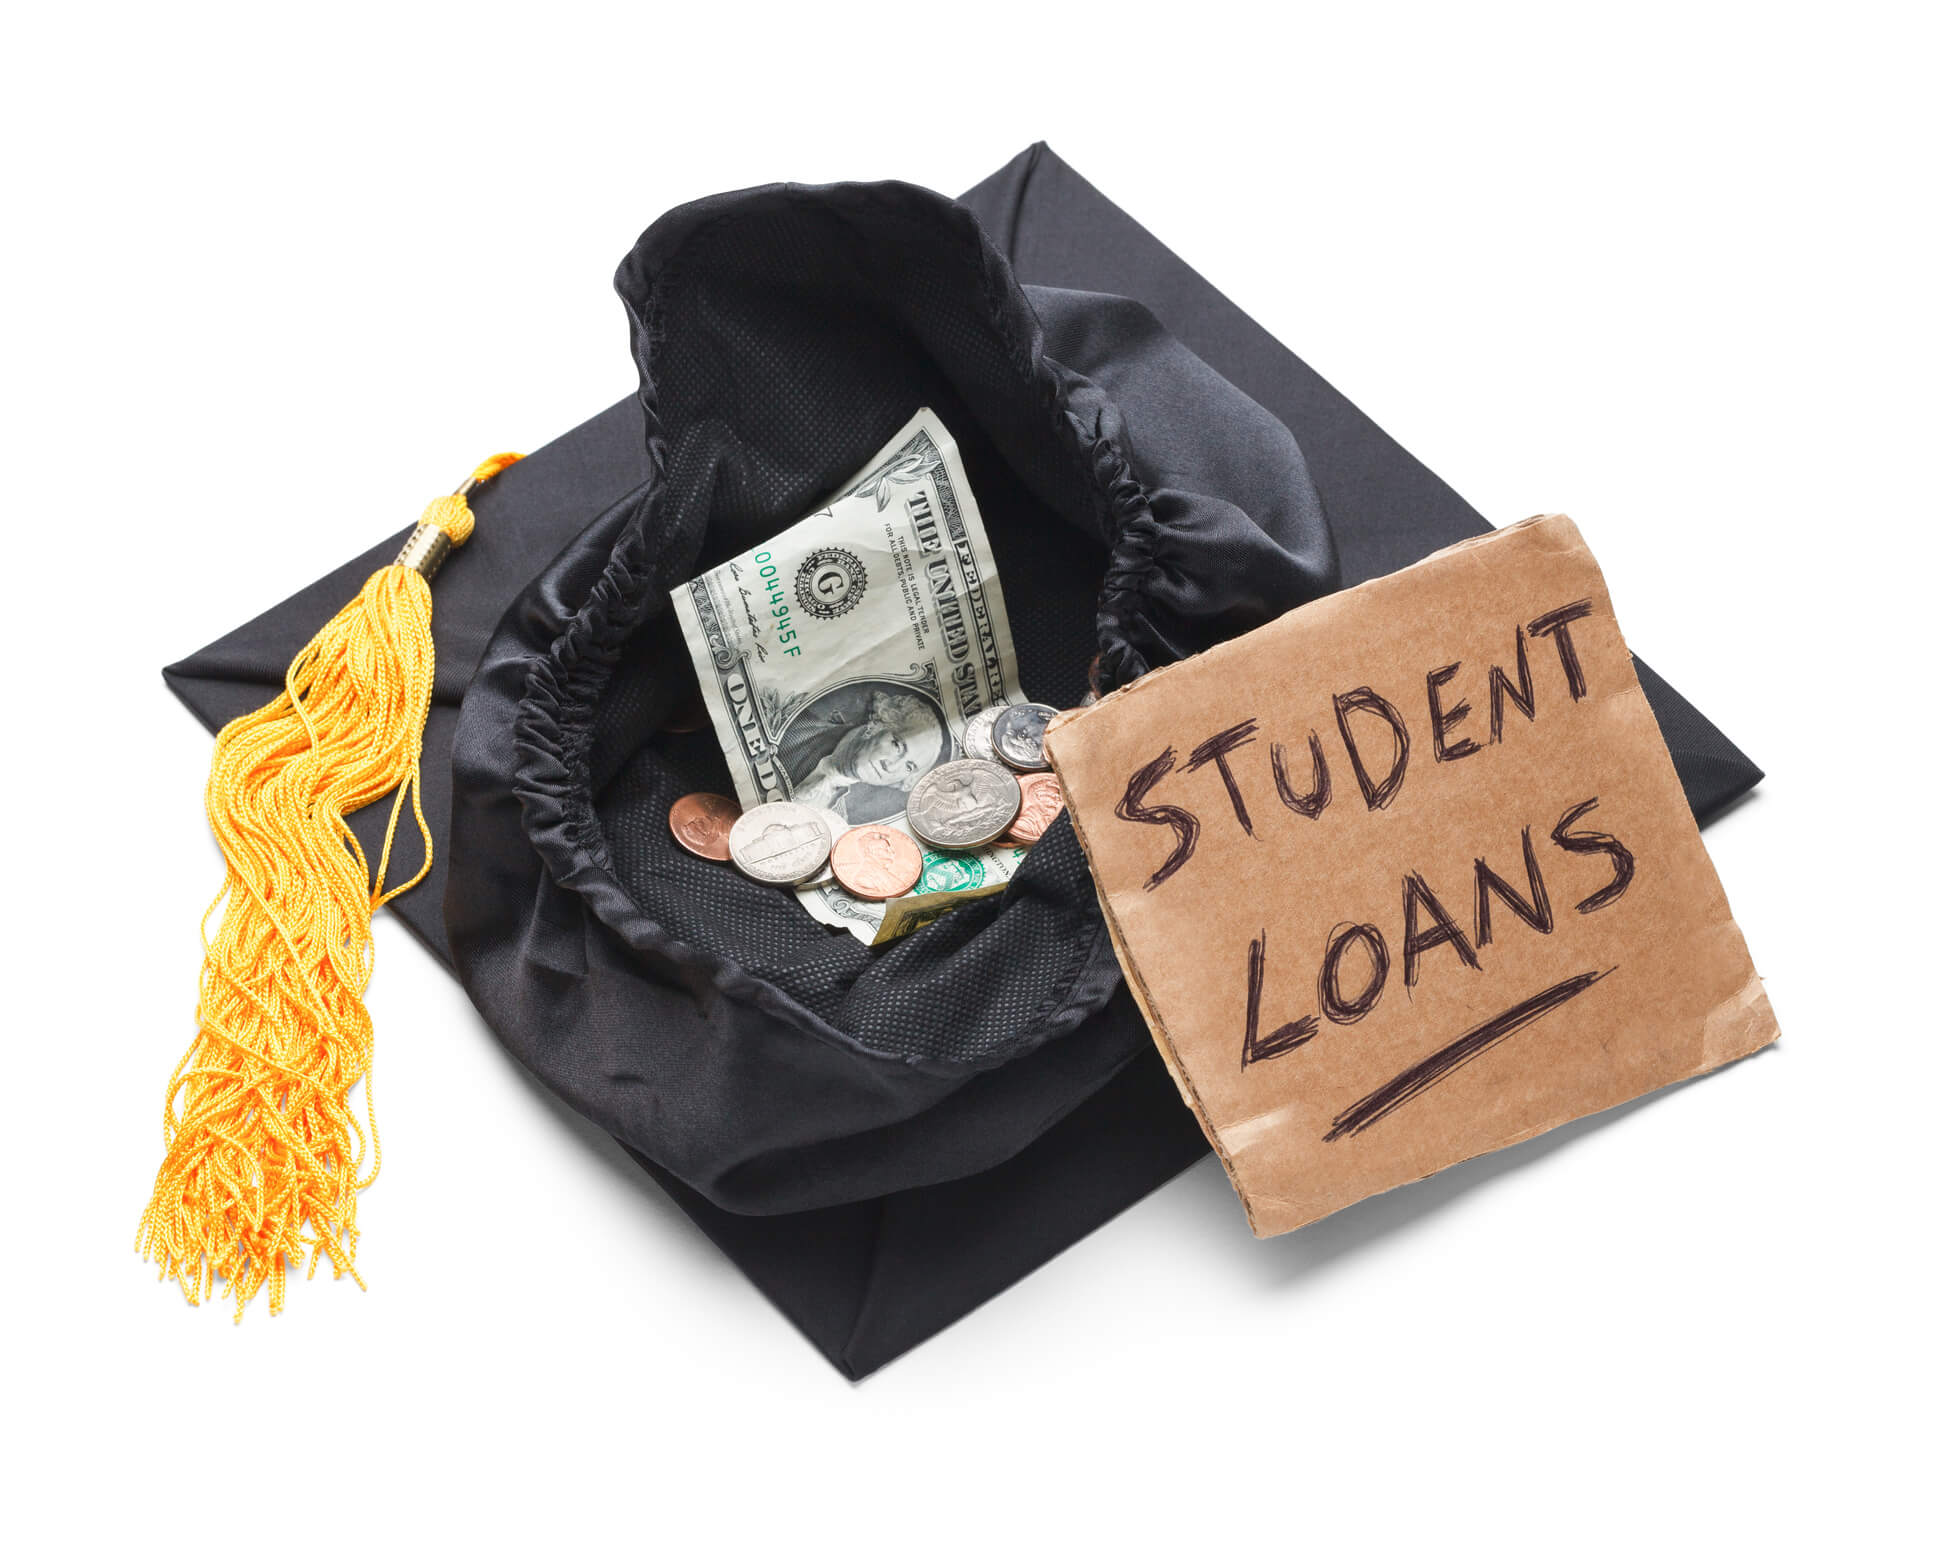 Student Loans ﻿- Complete Controller